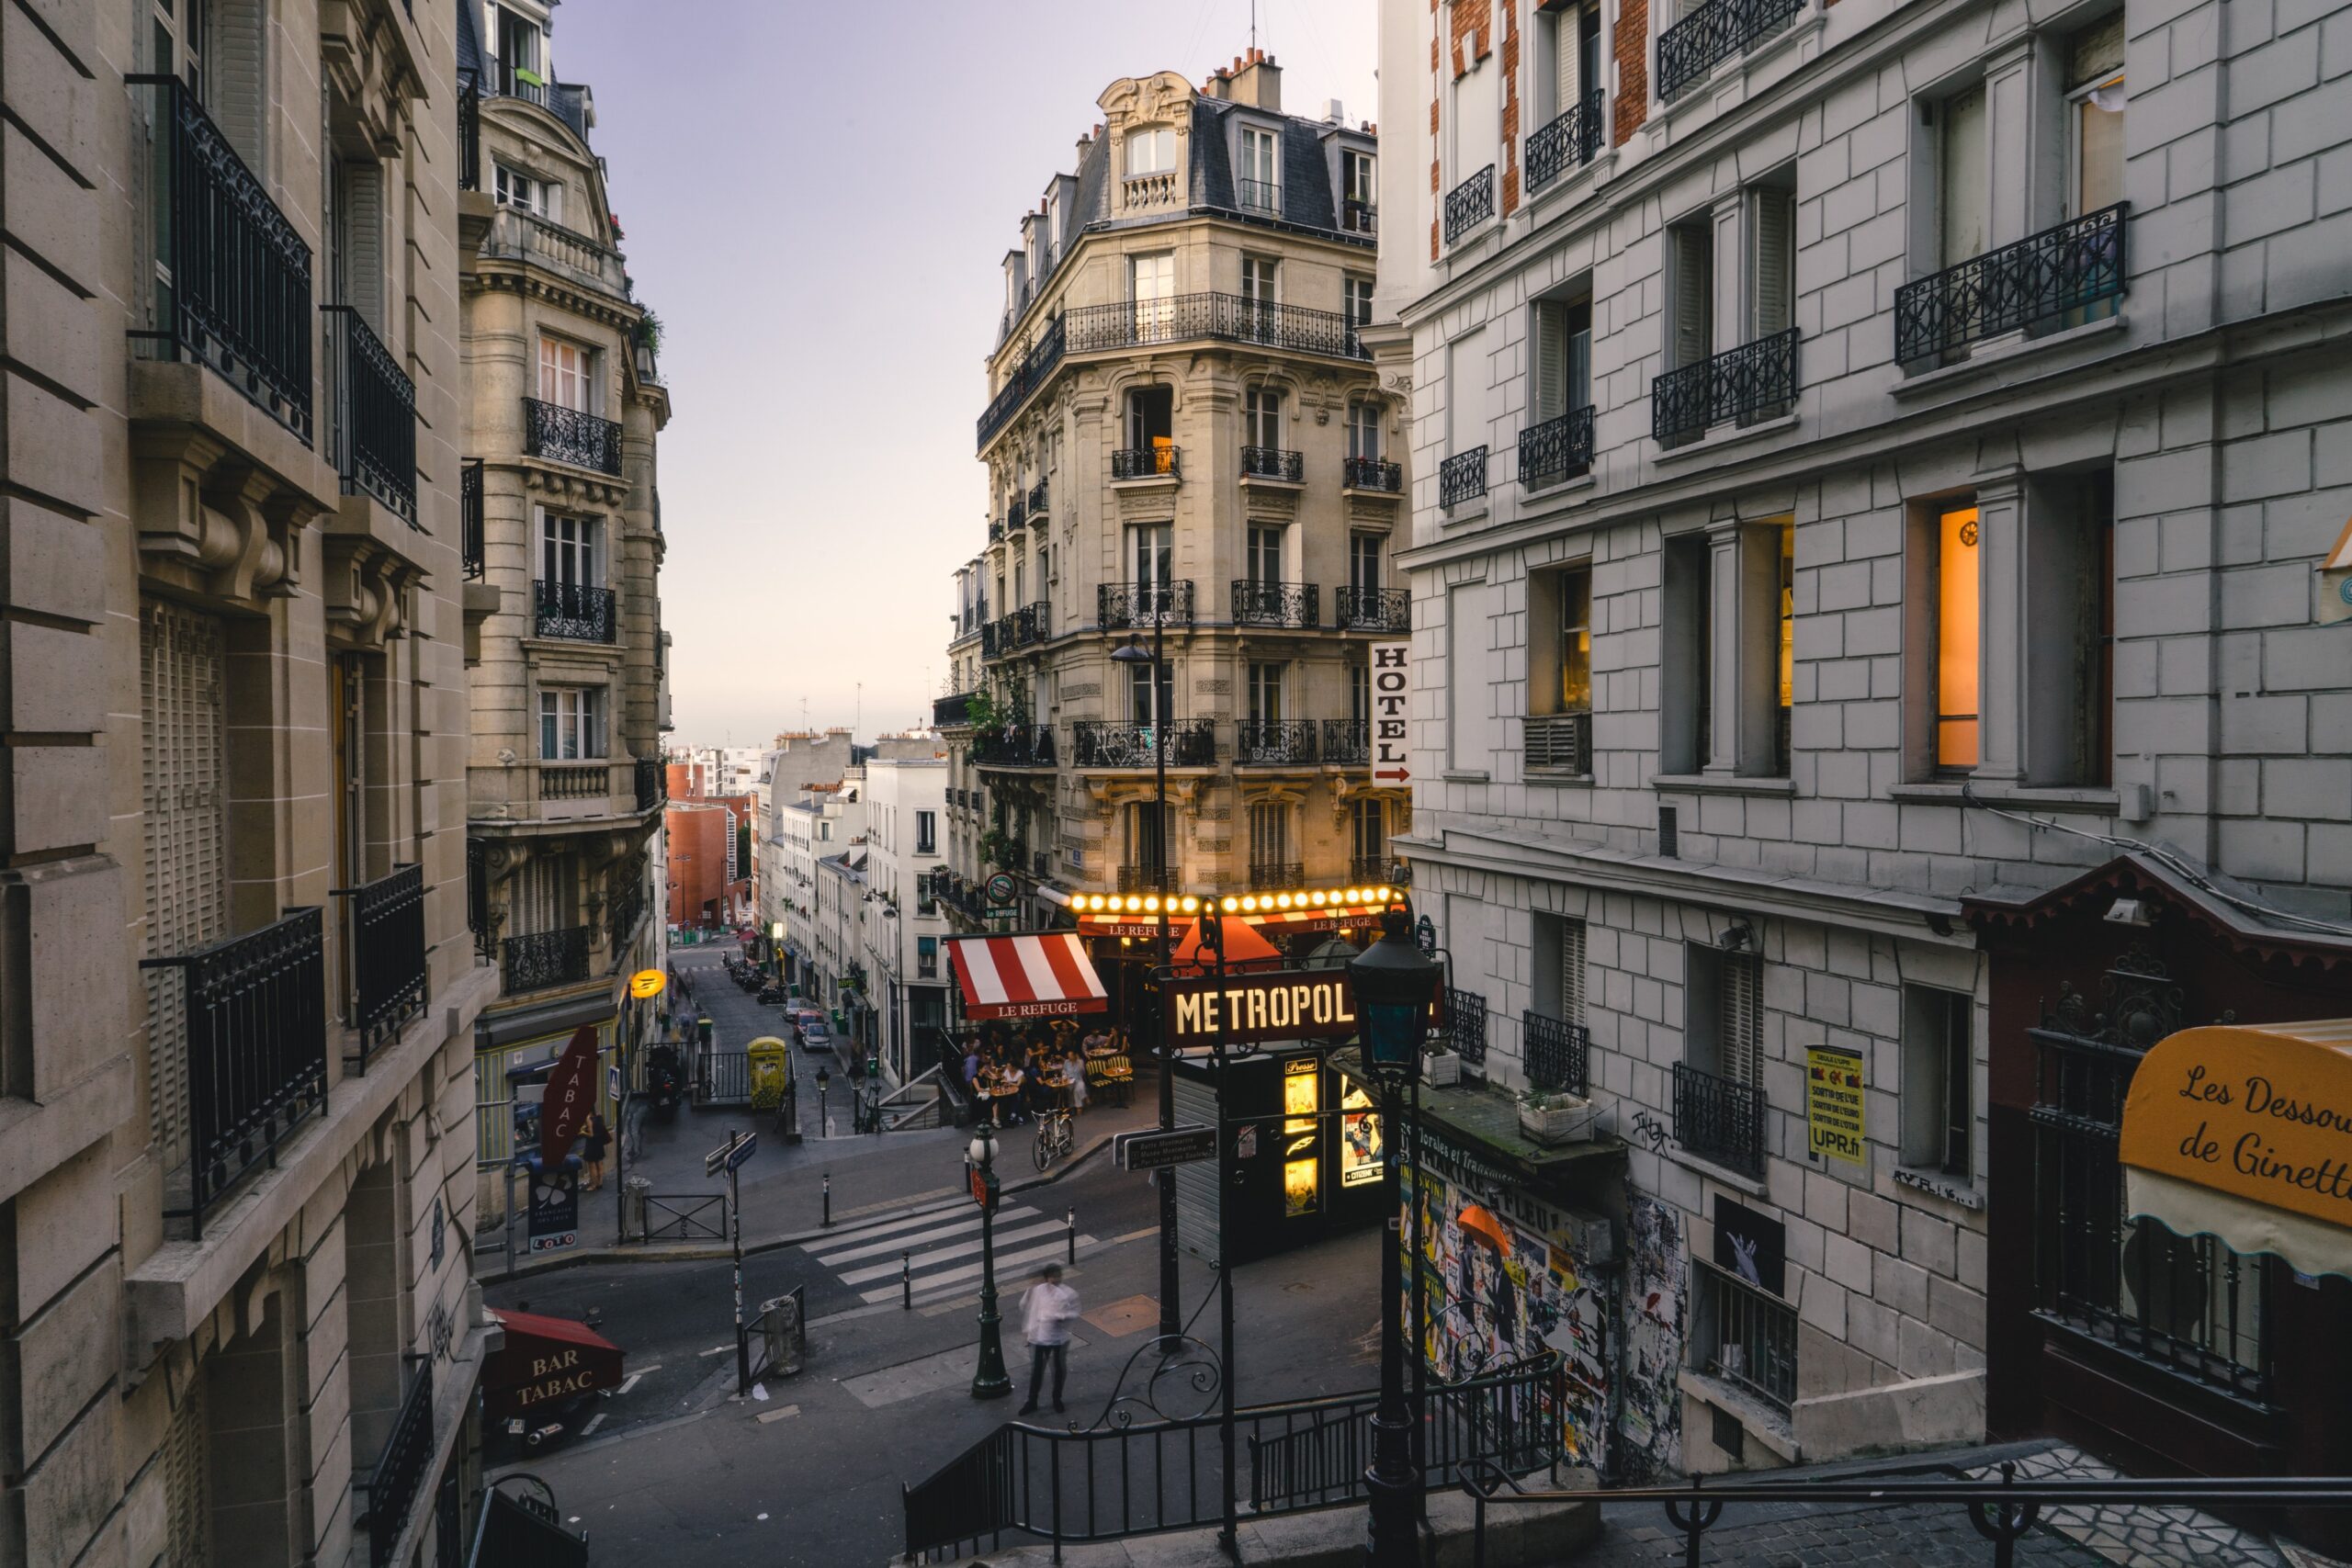 How to spend a Sunday in Paris